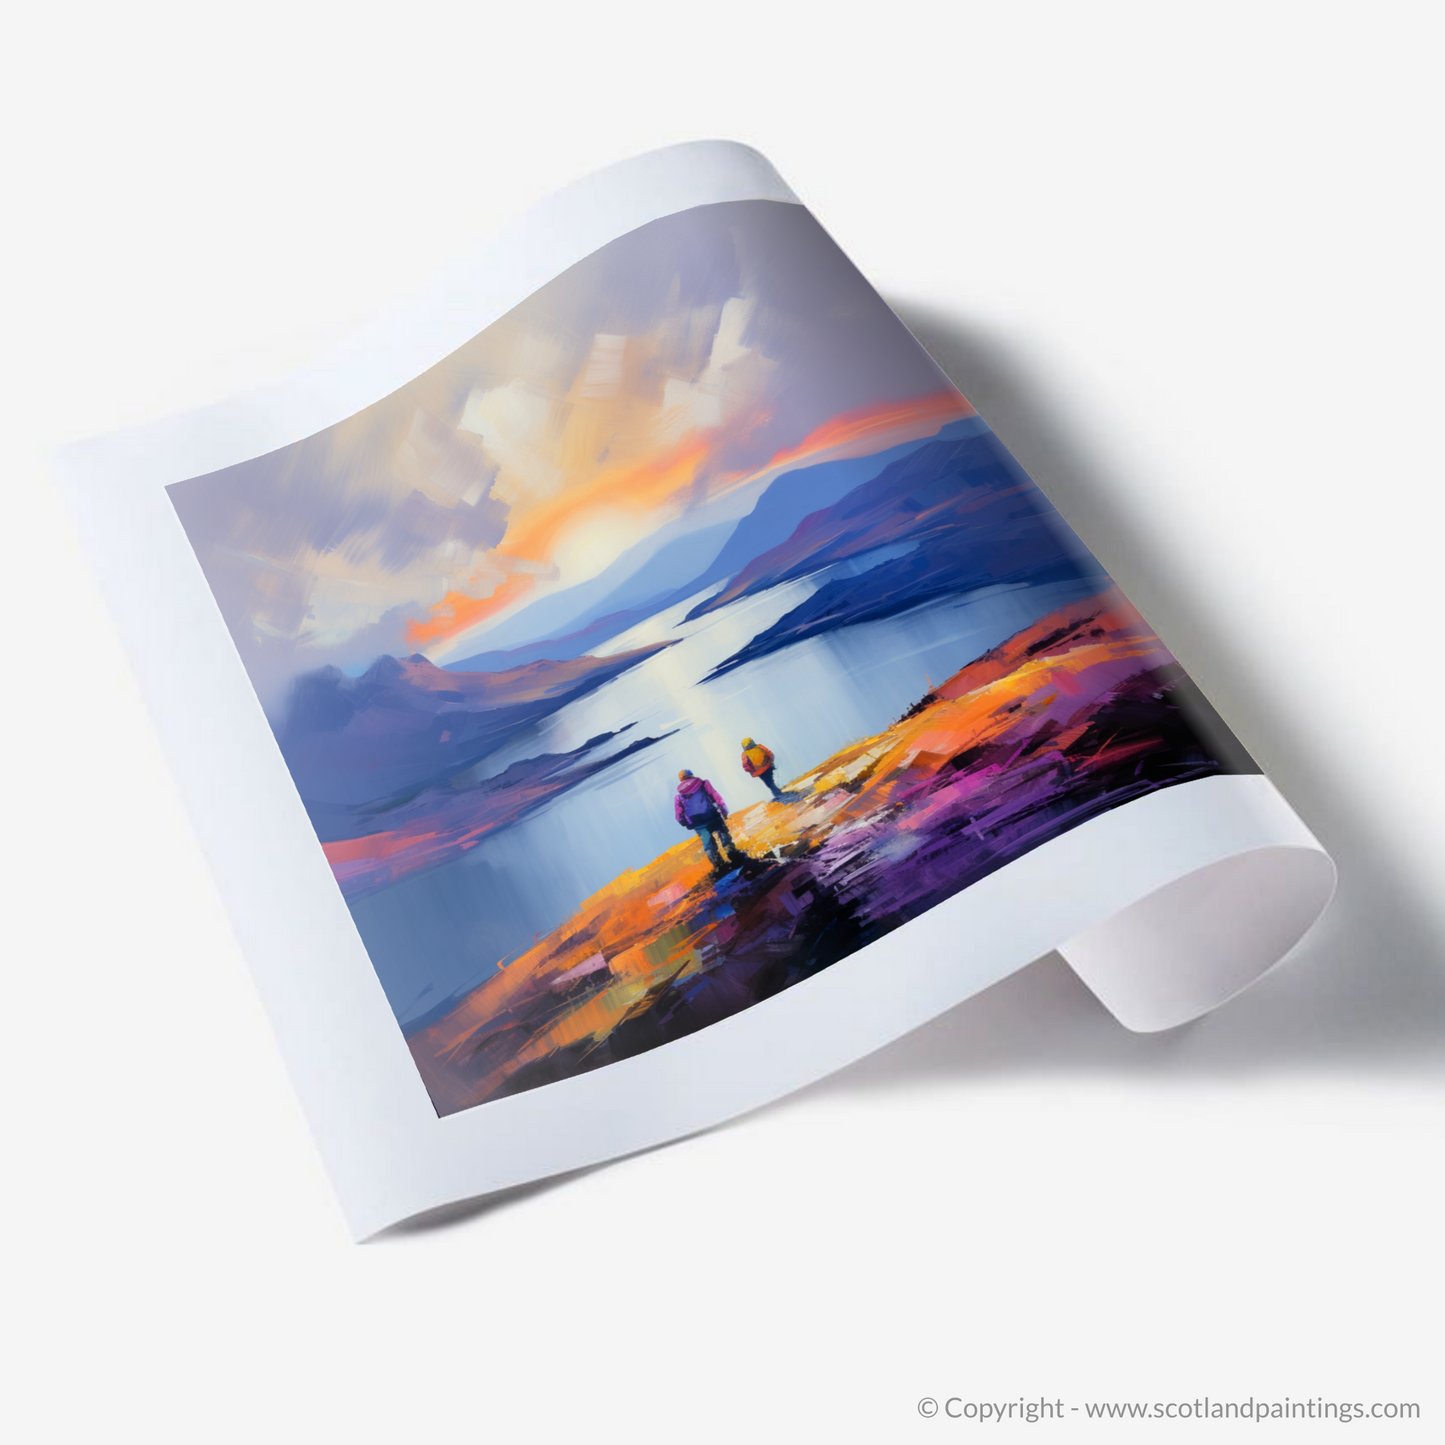 Art Print of Two hikers looking out on Loch Lomond